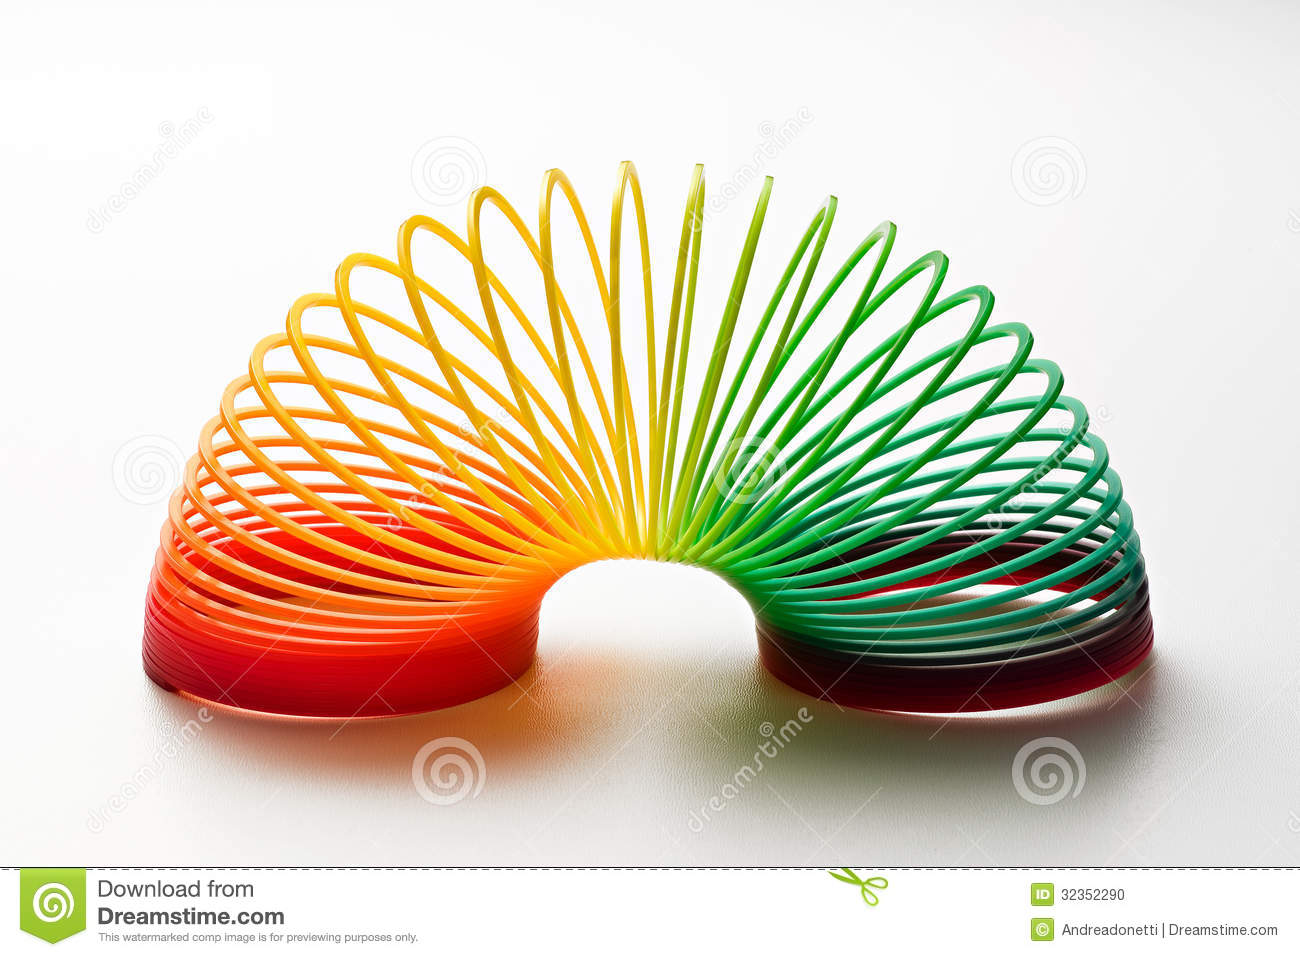 Rainbow Coloured Slinky Toy Made Of A Plastic Wire Spiral Coil Which